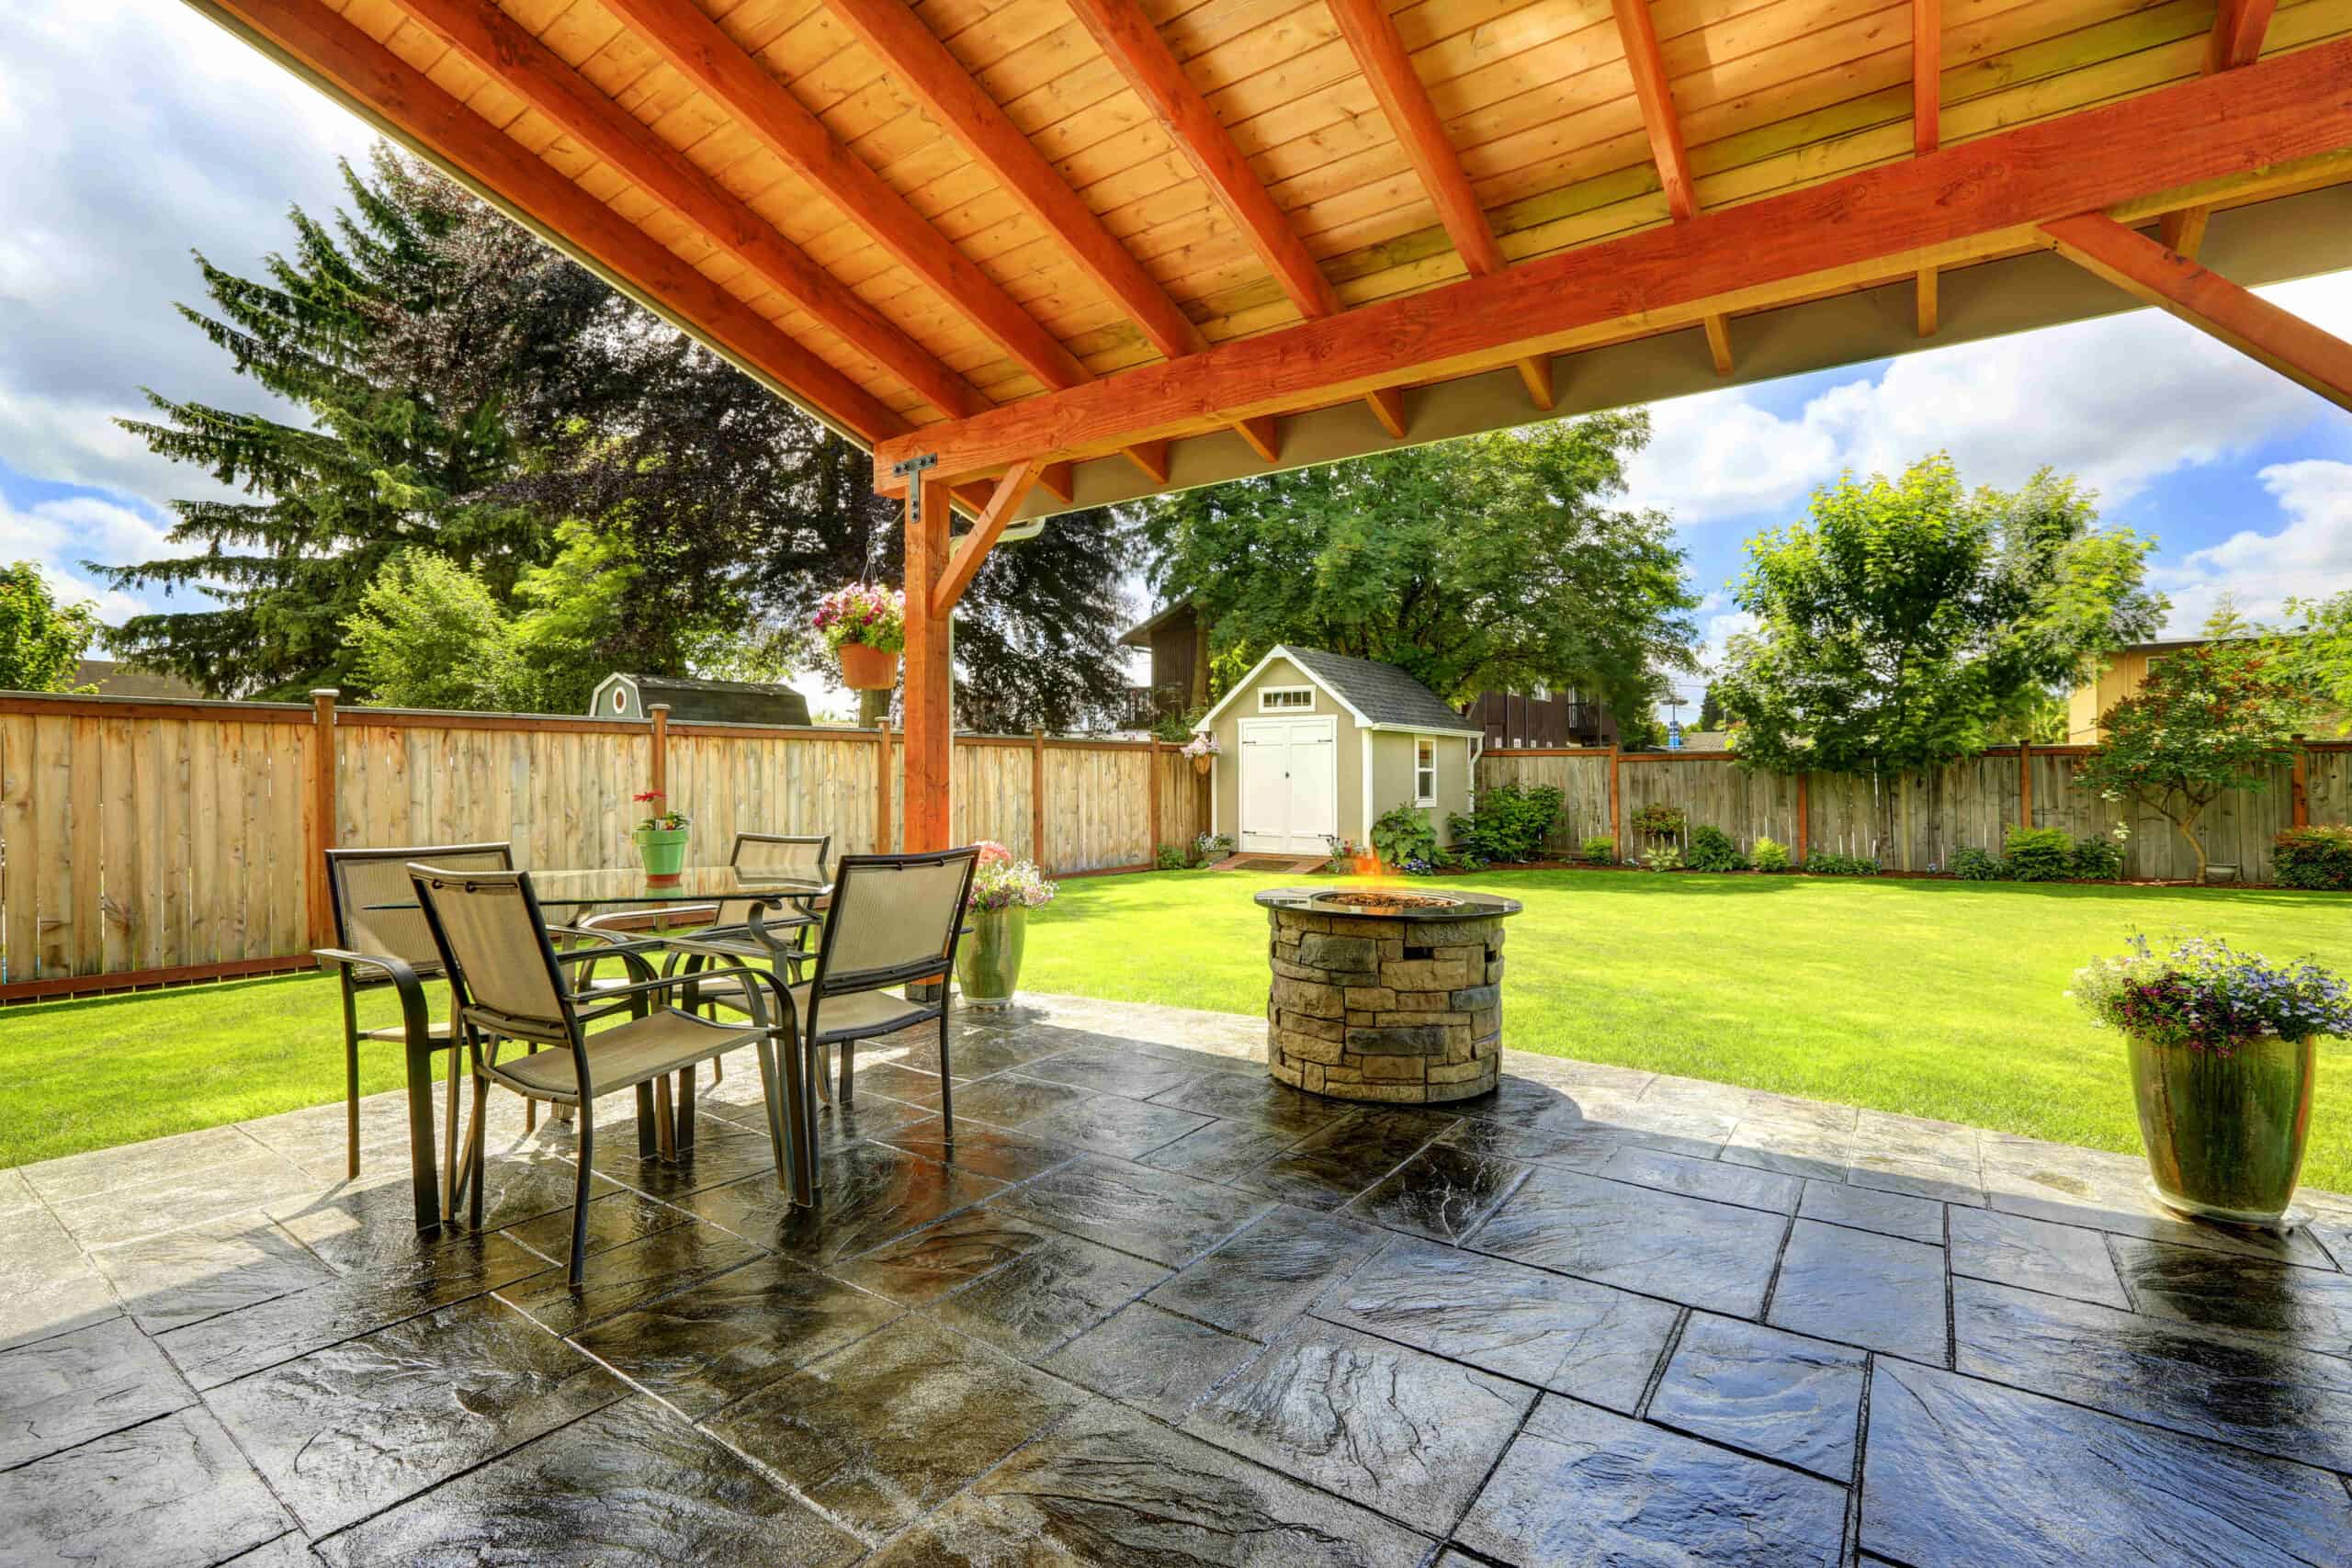 Develop beautiful patios that welcome guests without breaking the bank